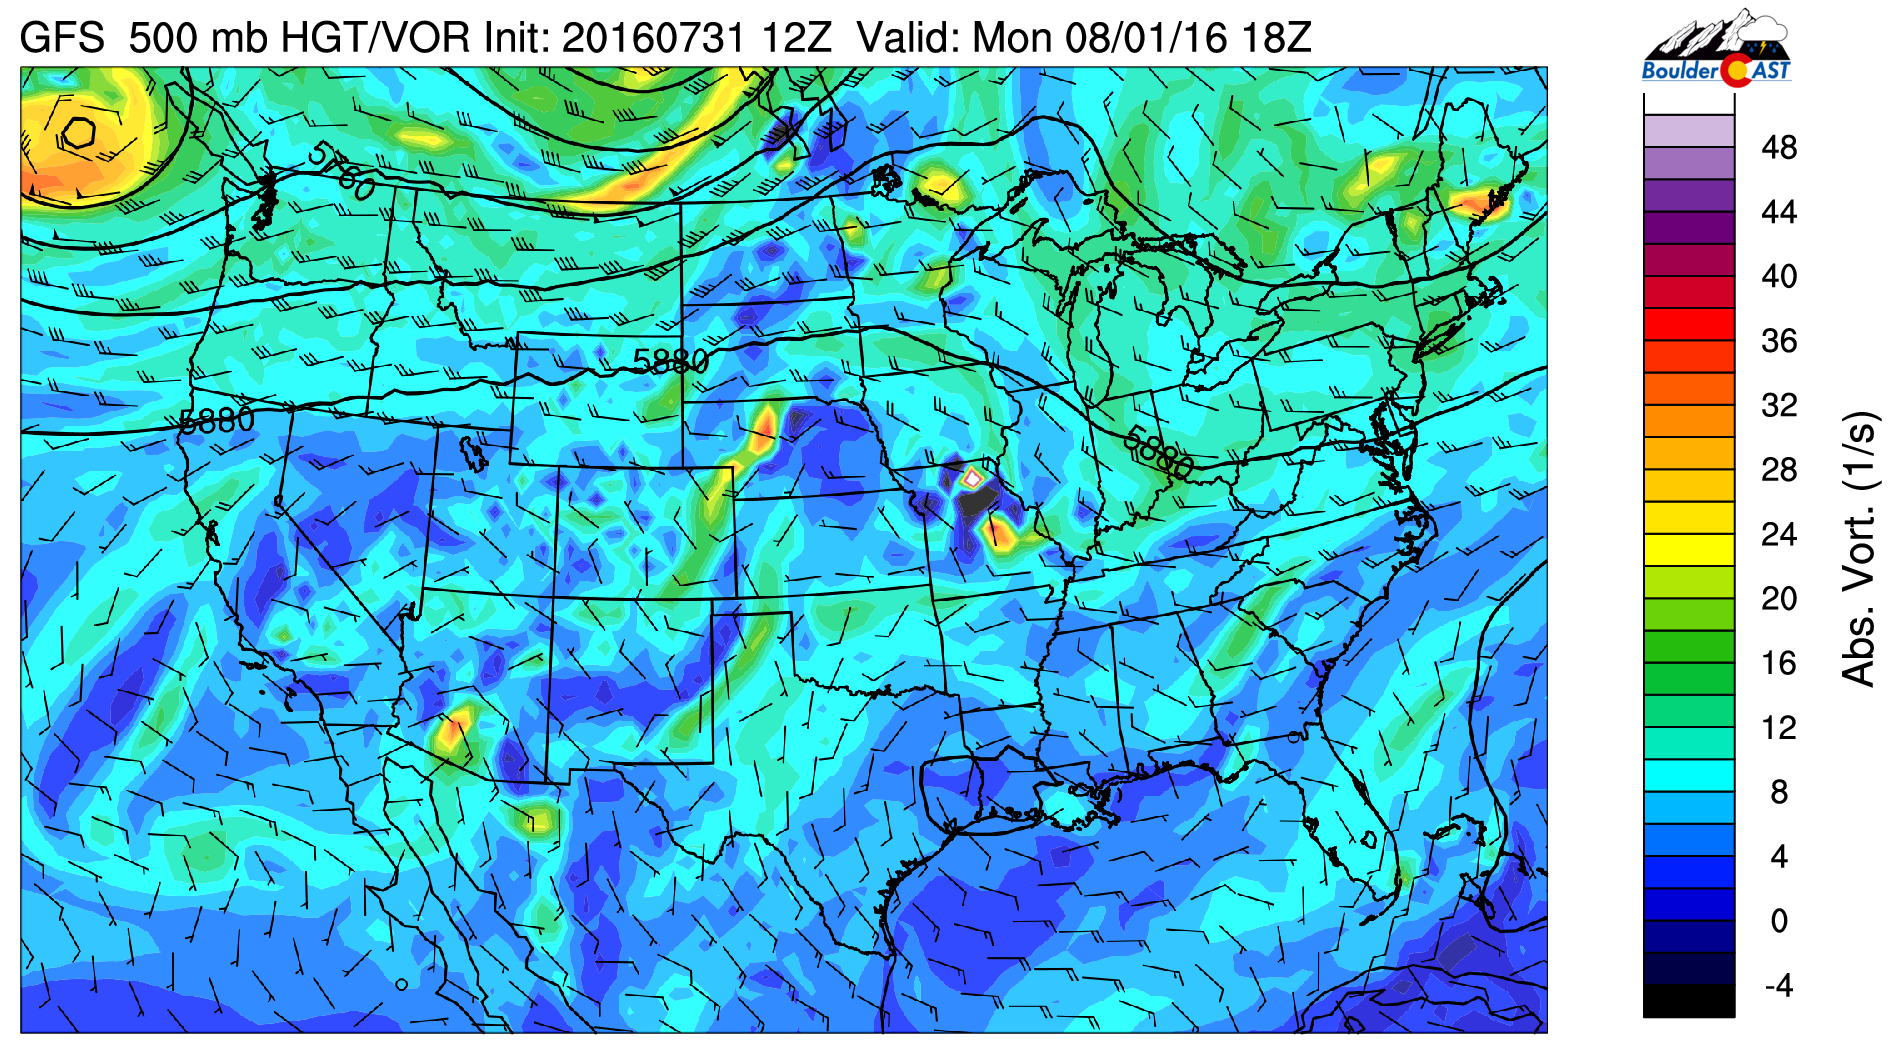 GFS 500 mb vorticity and mid-level flow for today